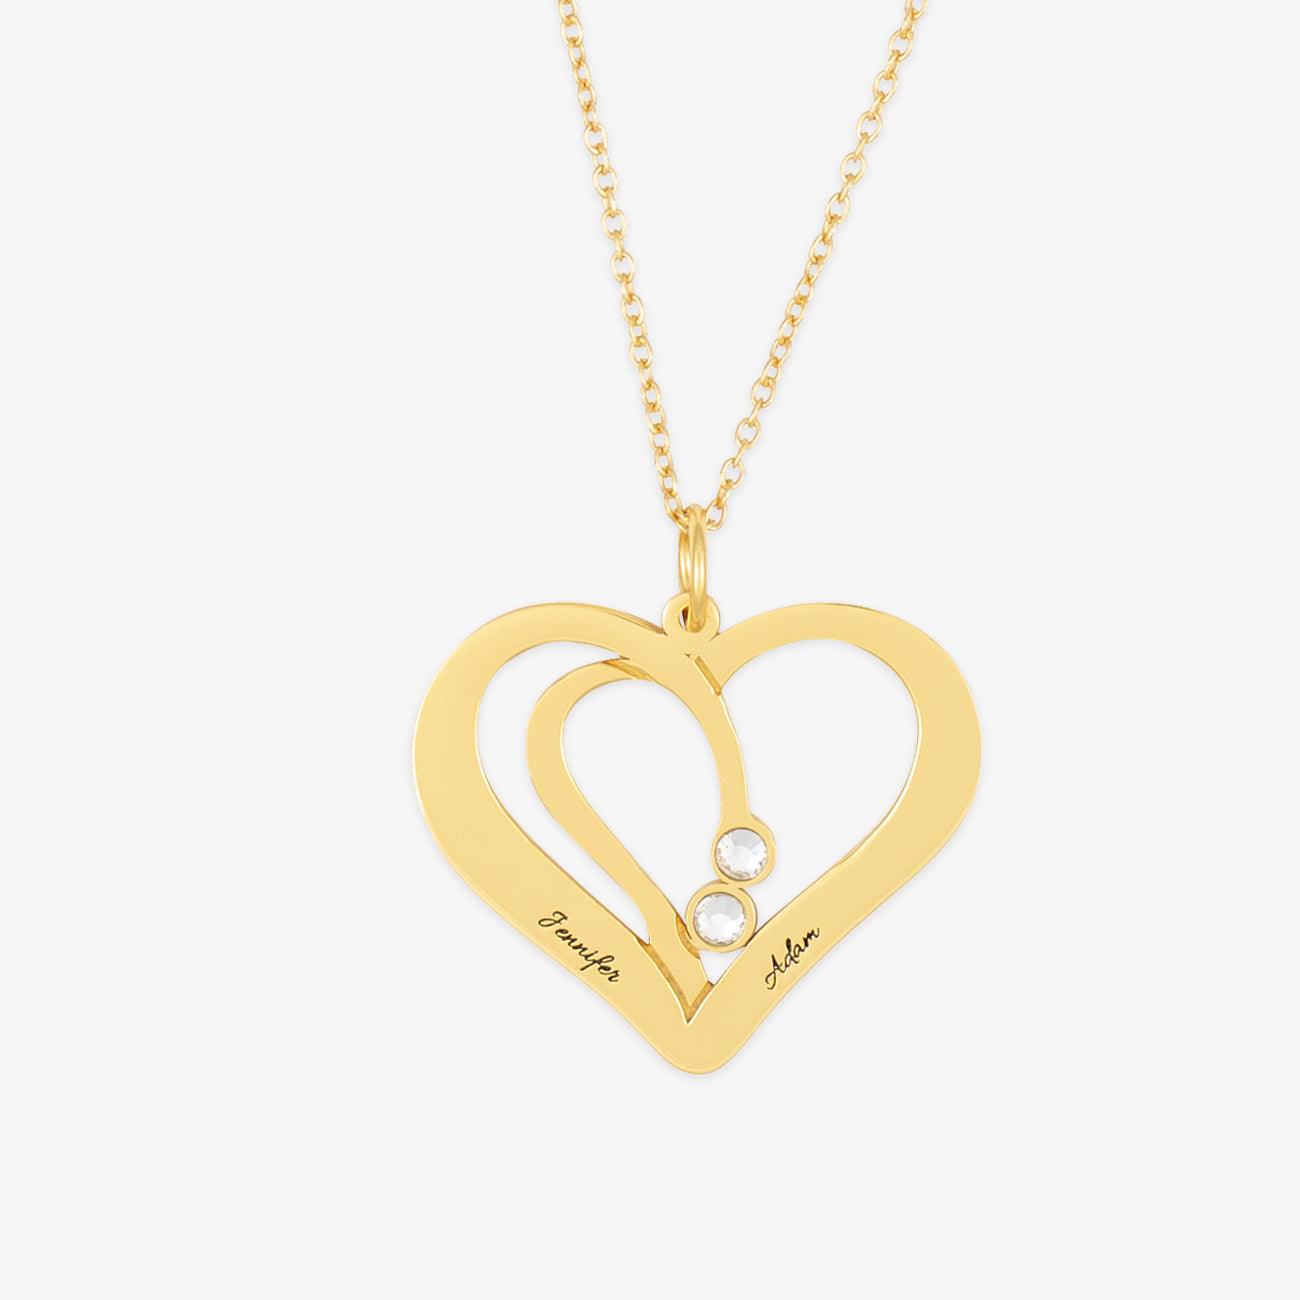 herzschmuck Engraved Necklaces Intricate Dual-Engraved Hollow Heart Necklace